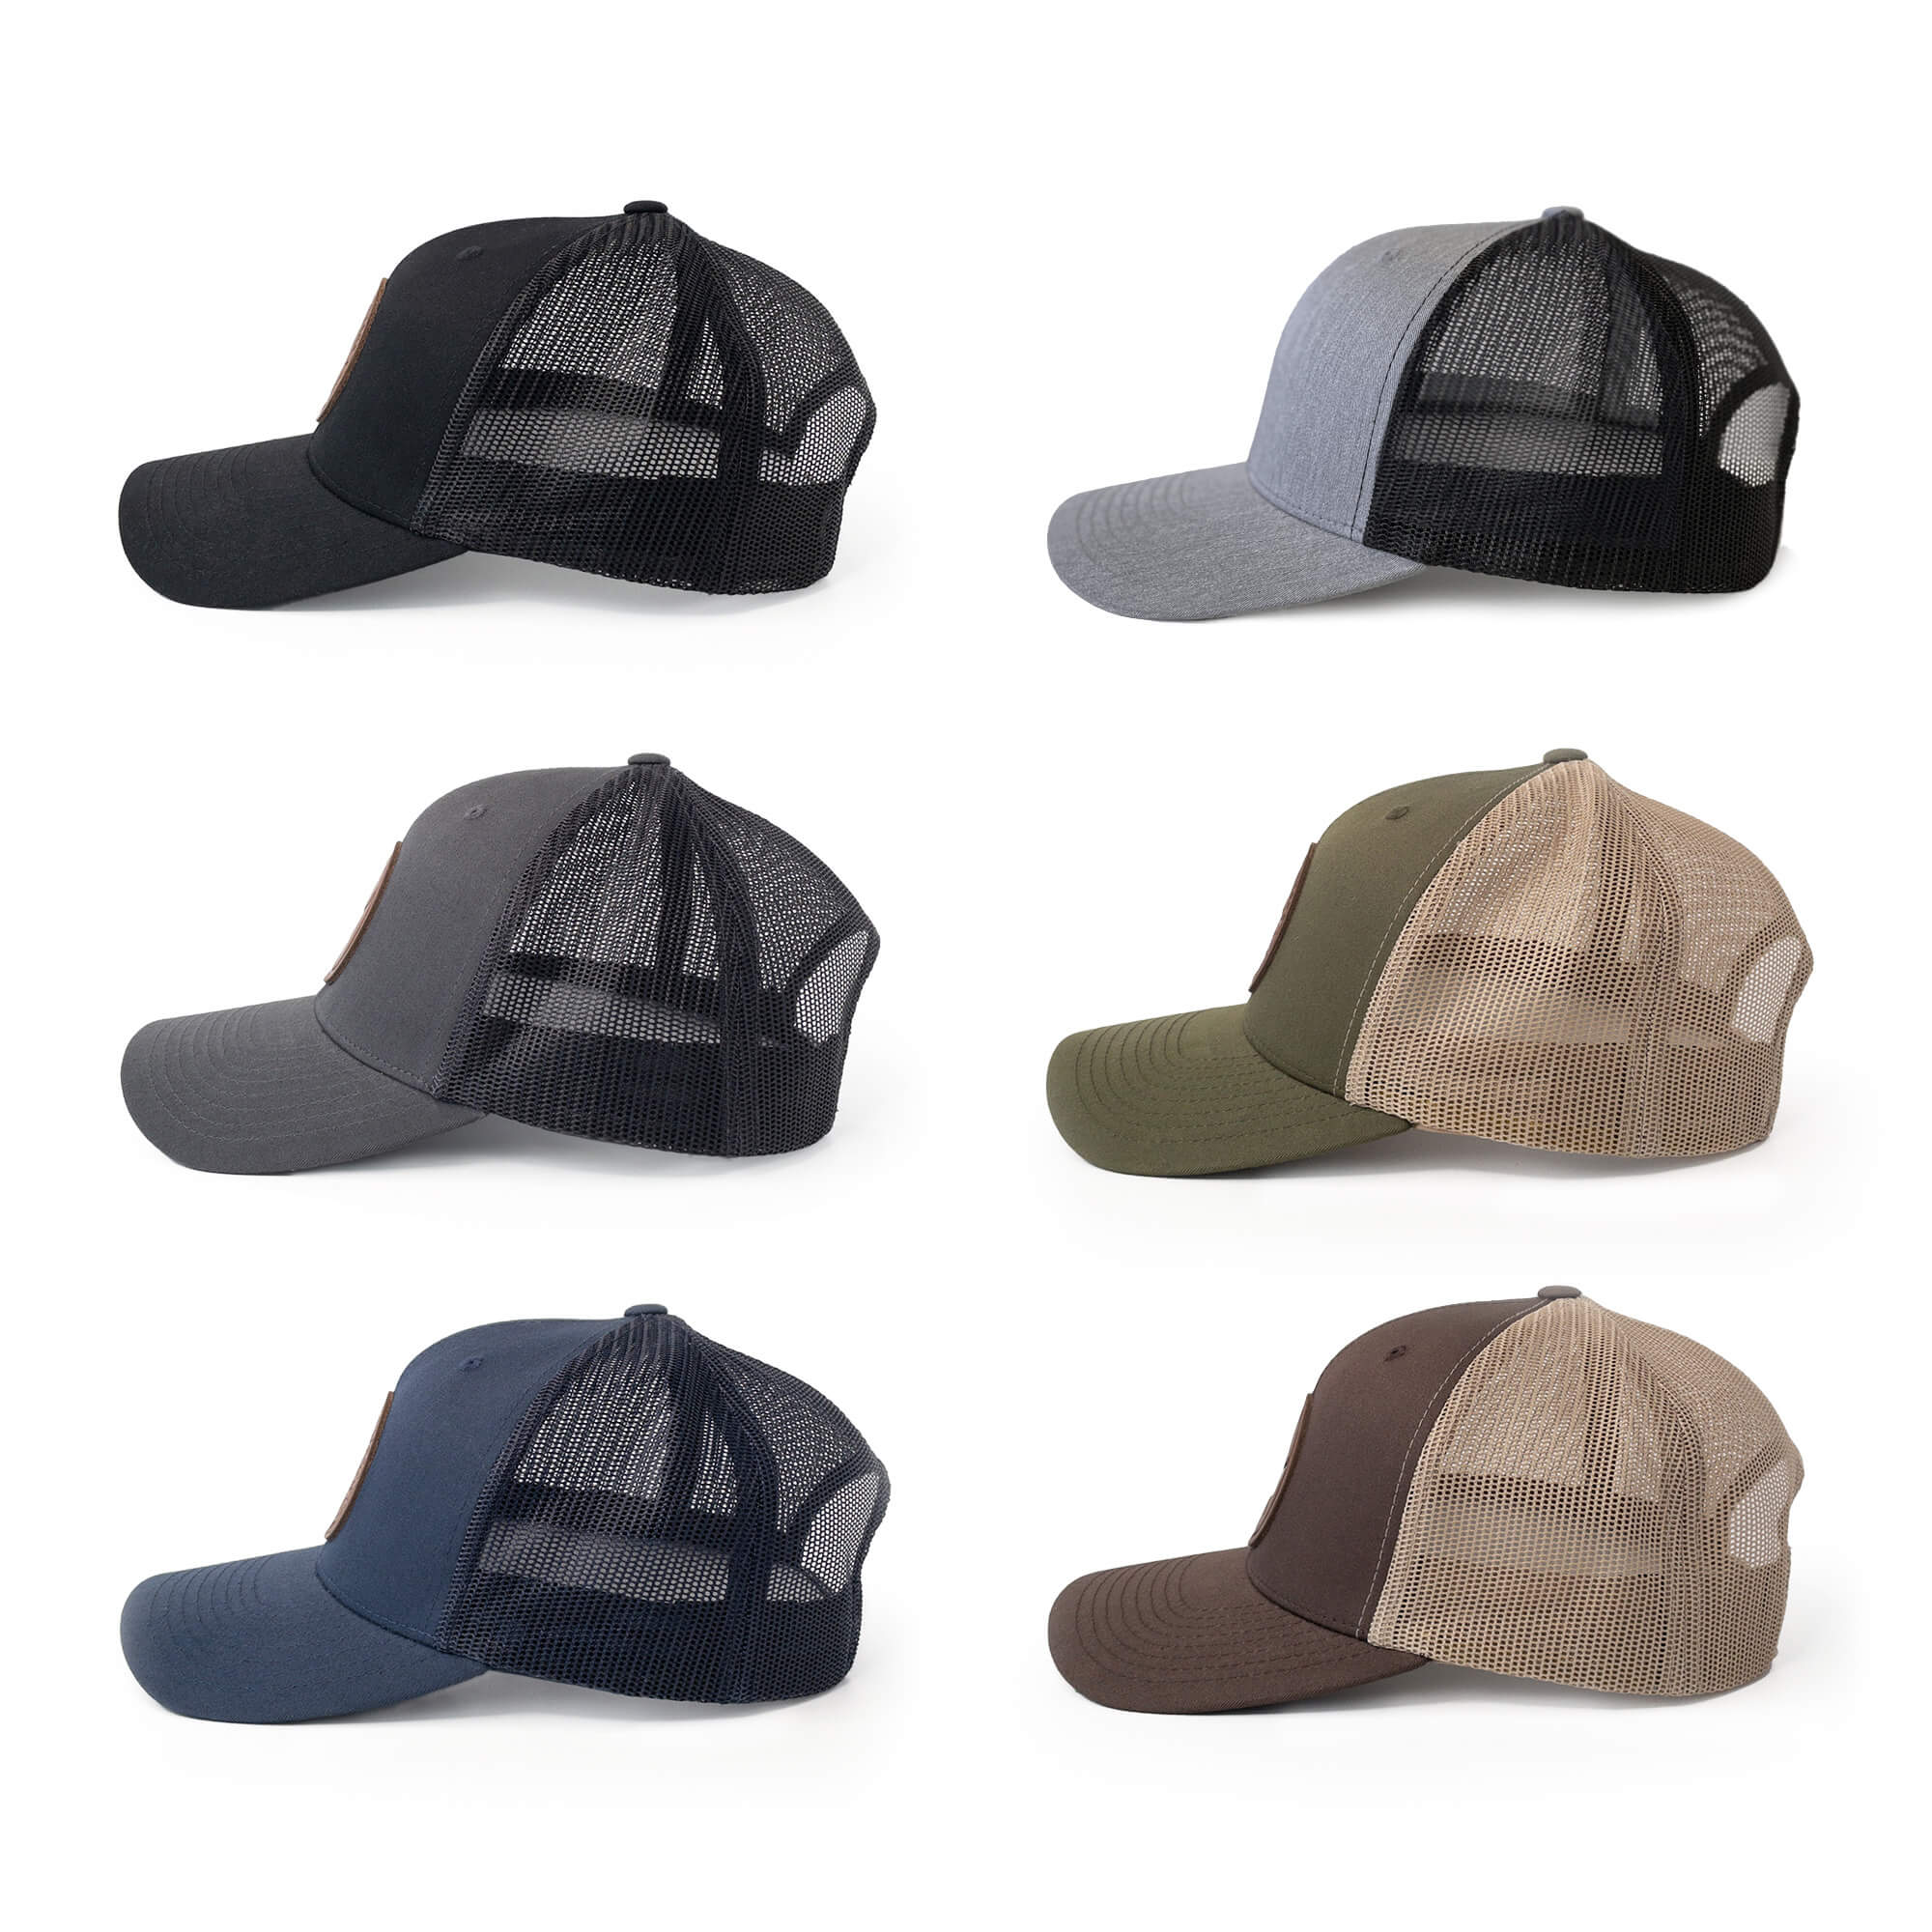 Leather patch trucker hats available in 6 colors | BLACK-003-003, CHARC-003-003, NAVY-003-003, HGREY-003-003, MOSS-003-003, BROWN-003-003